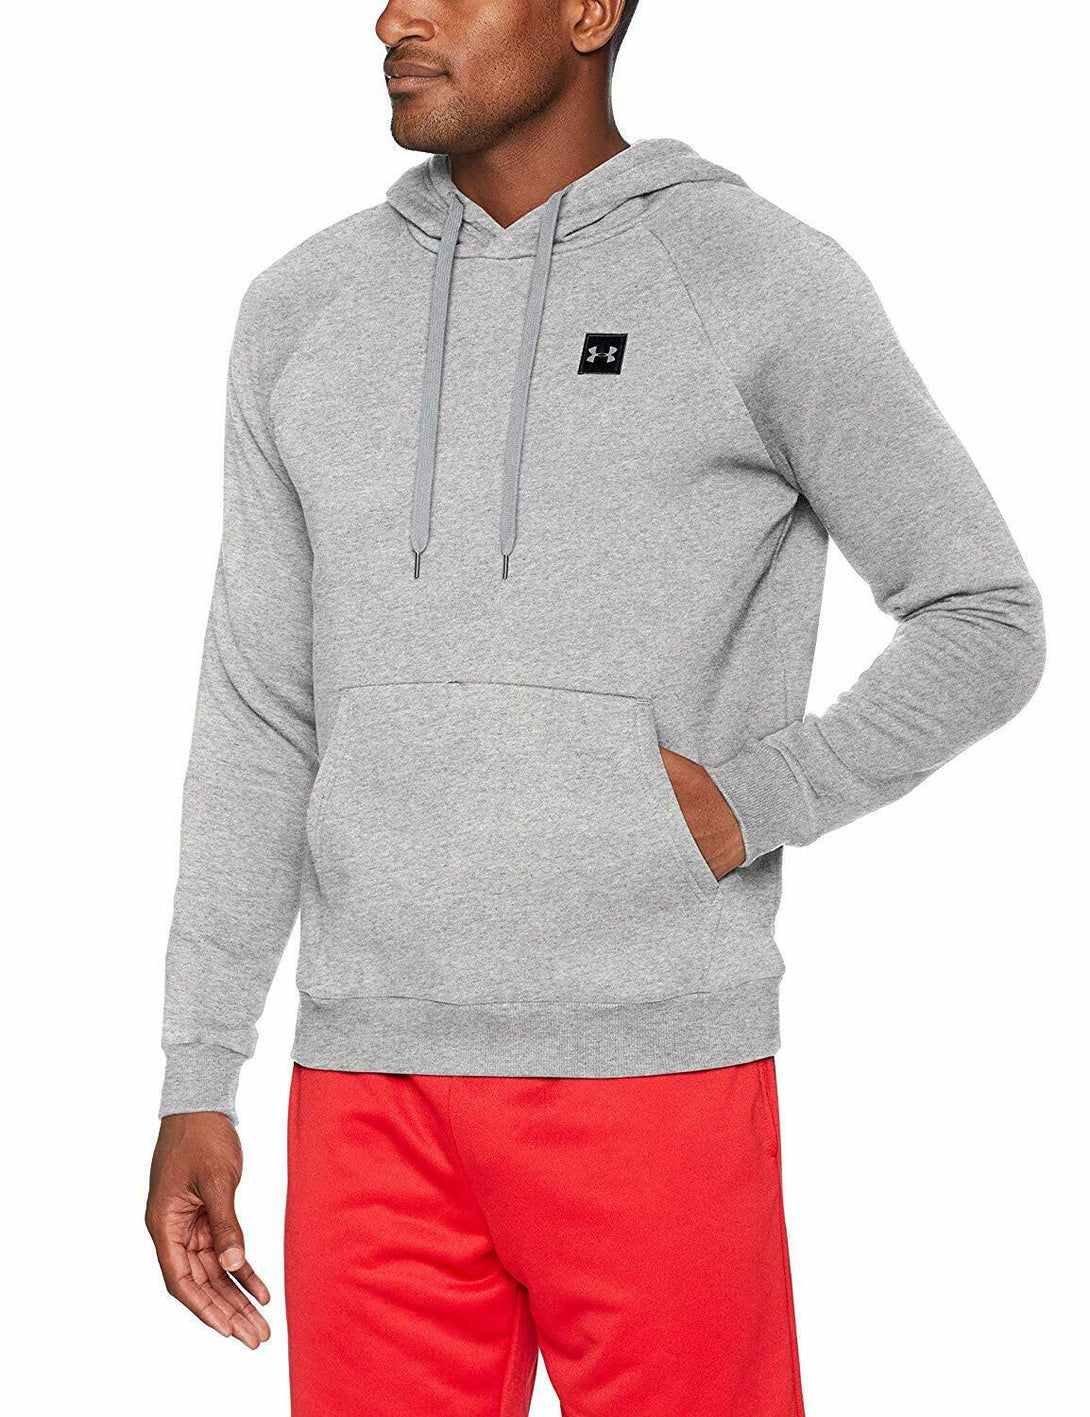 Under Armour Rival Fleece Pull Over Hoody